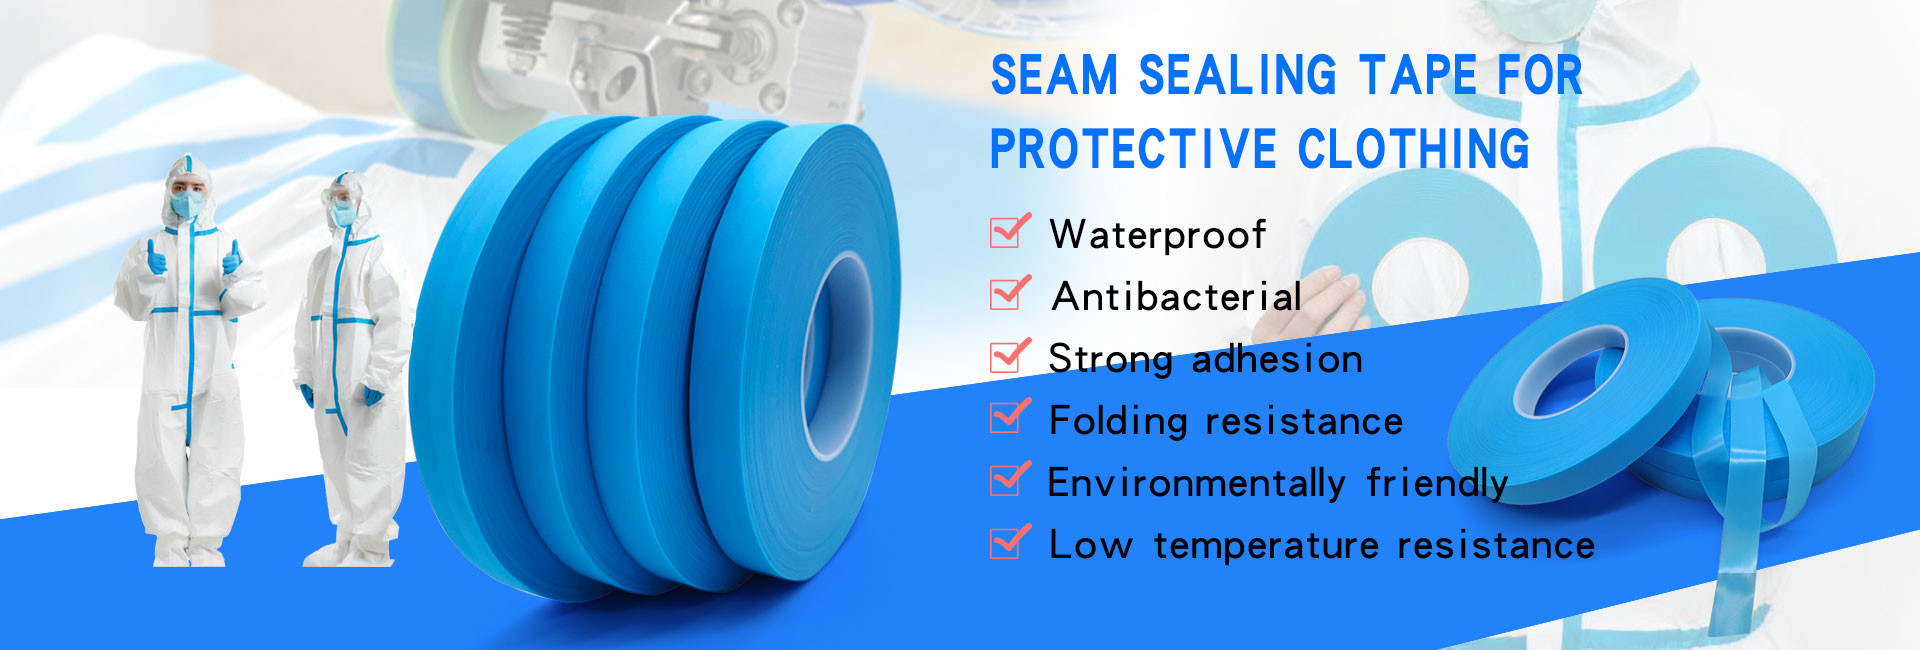 Seam Sealing Tape For Protective Suit